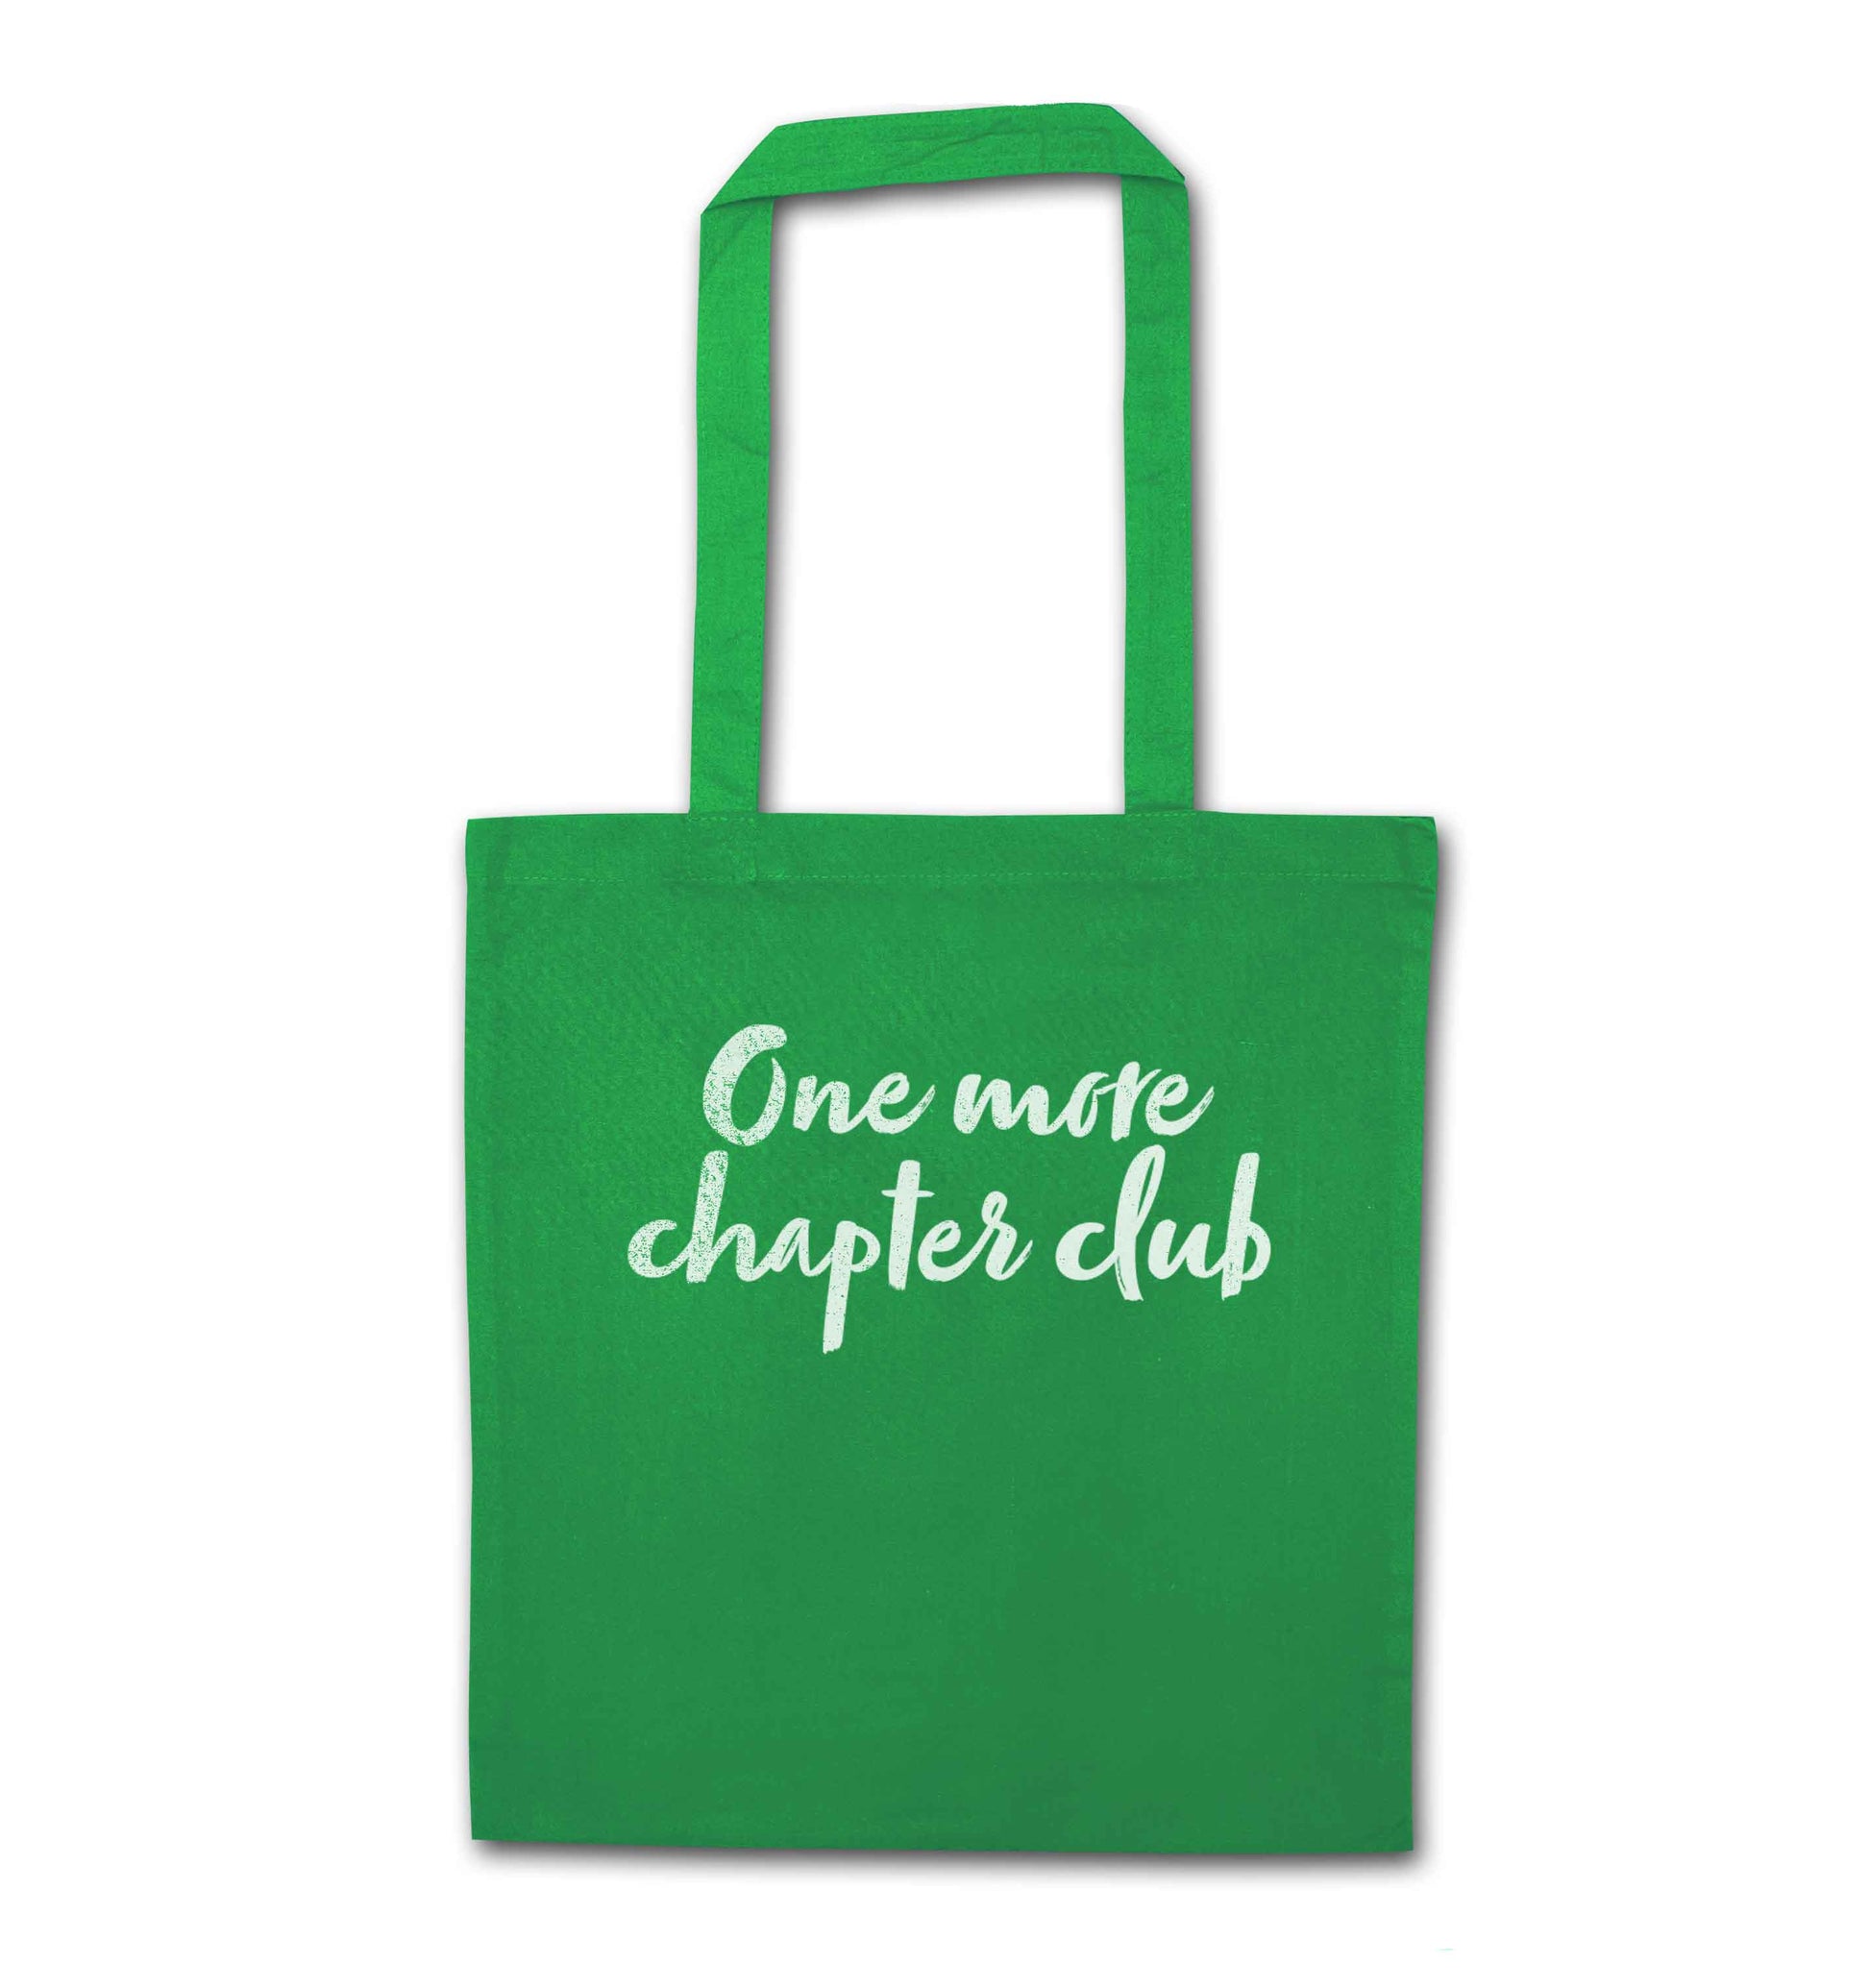 One more chapter club Kit green tote bag